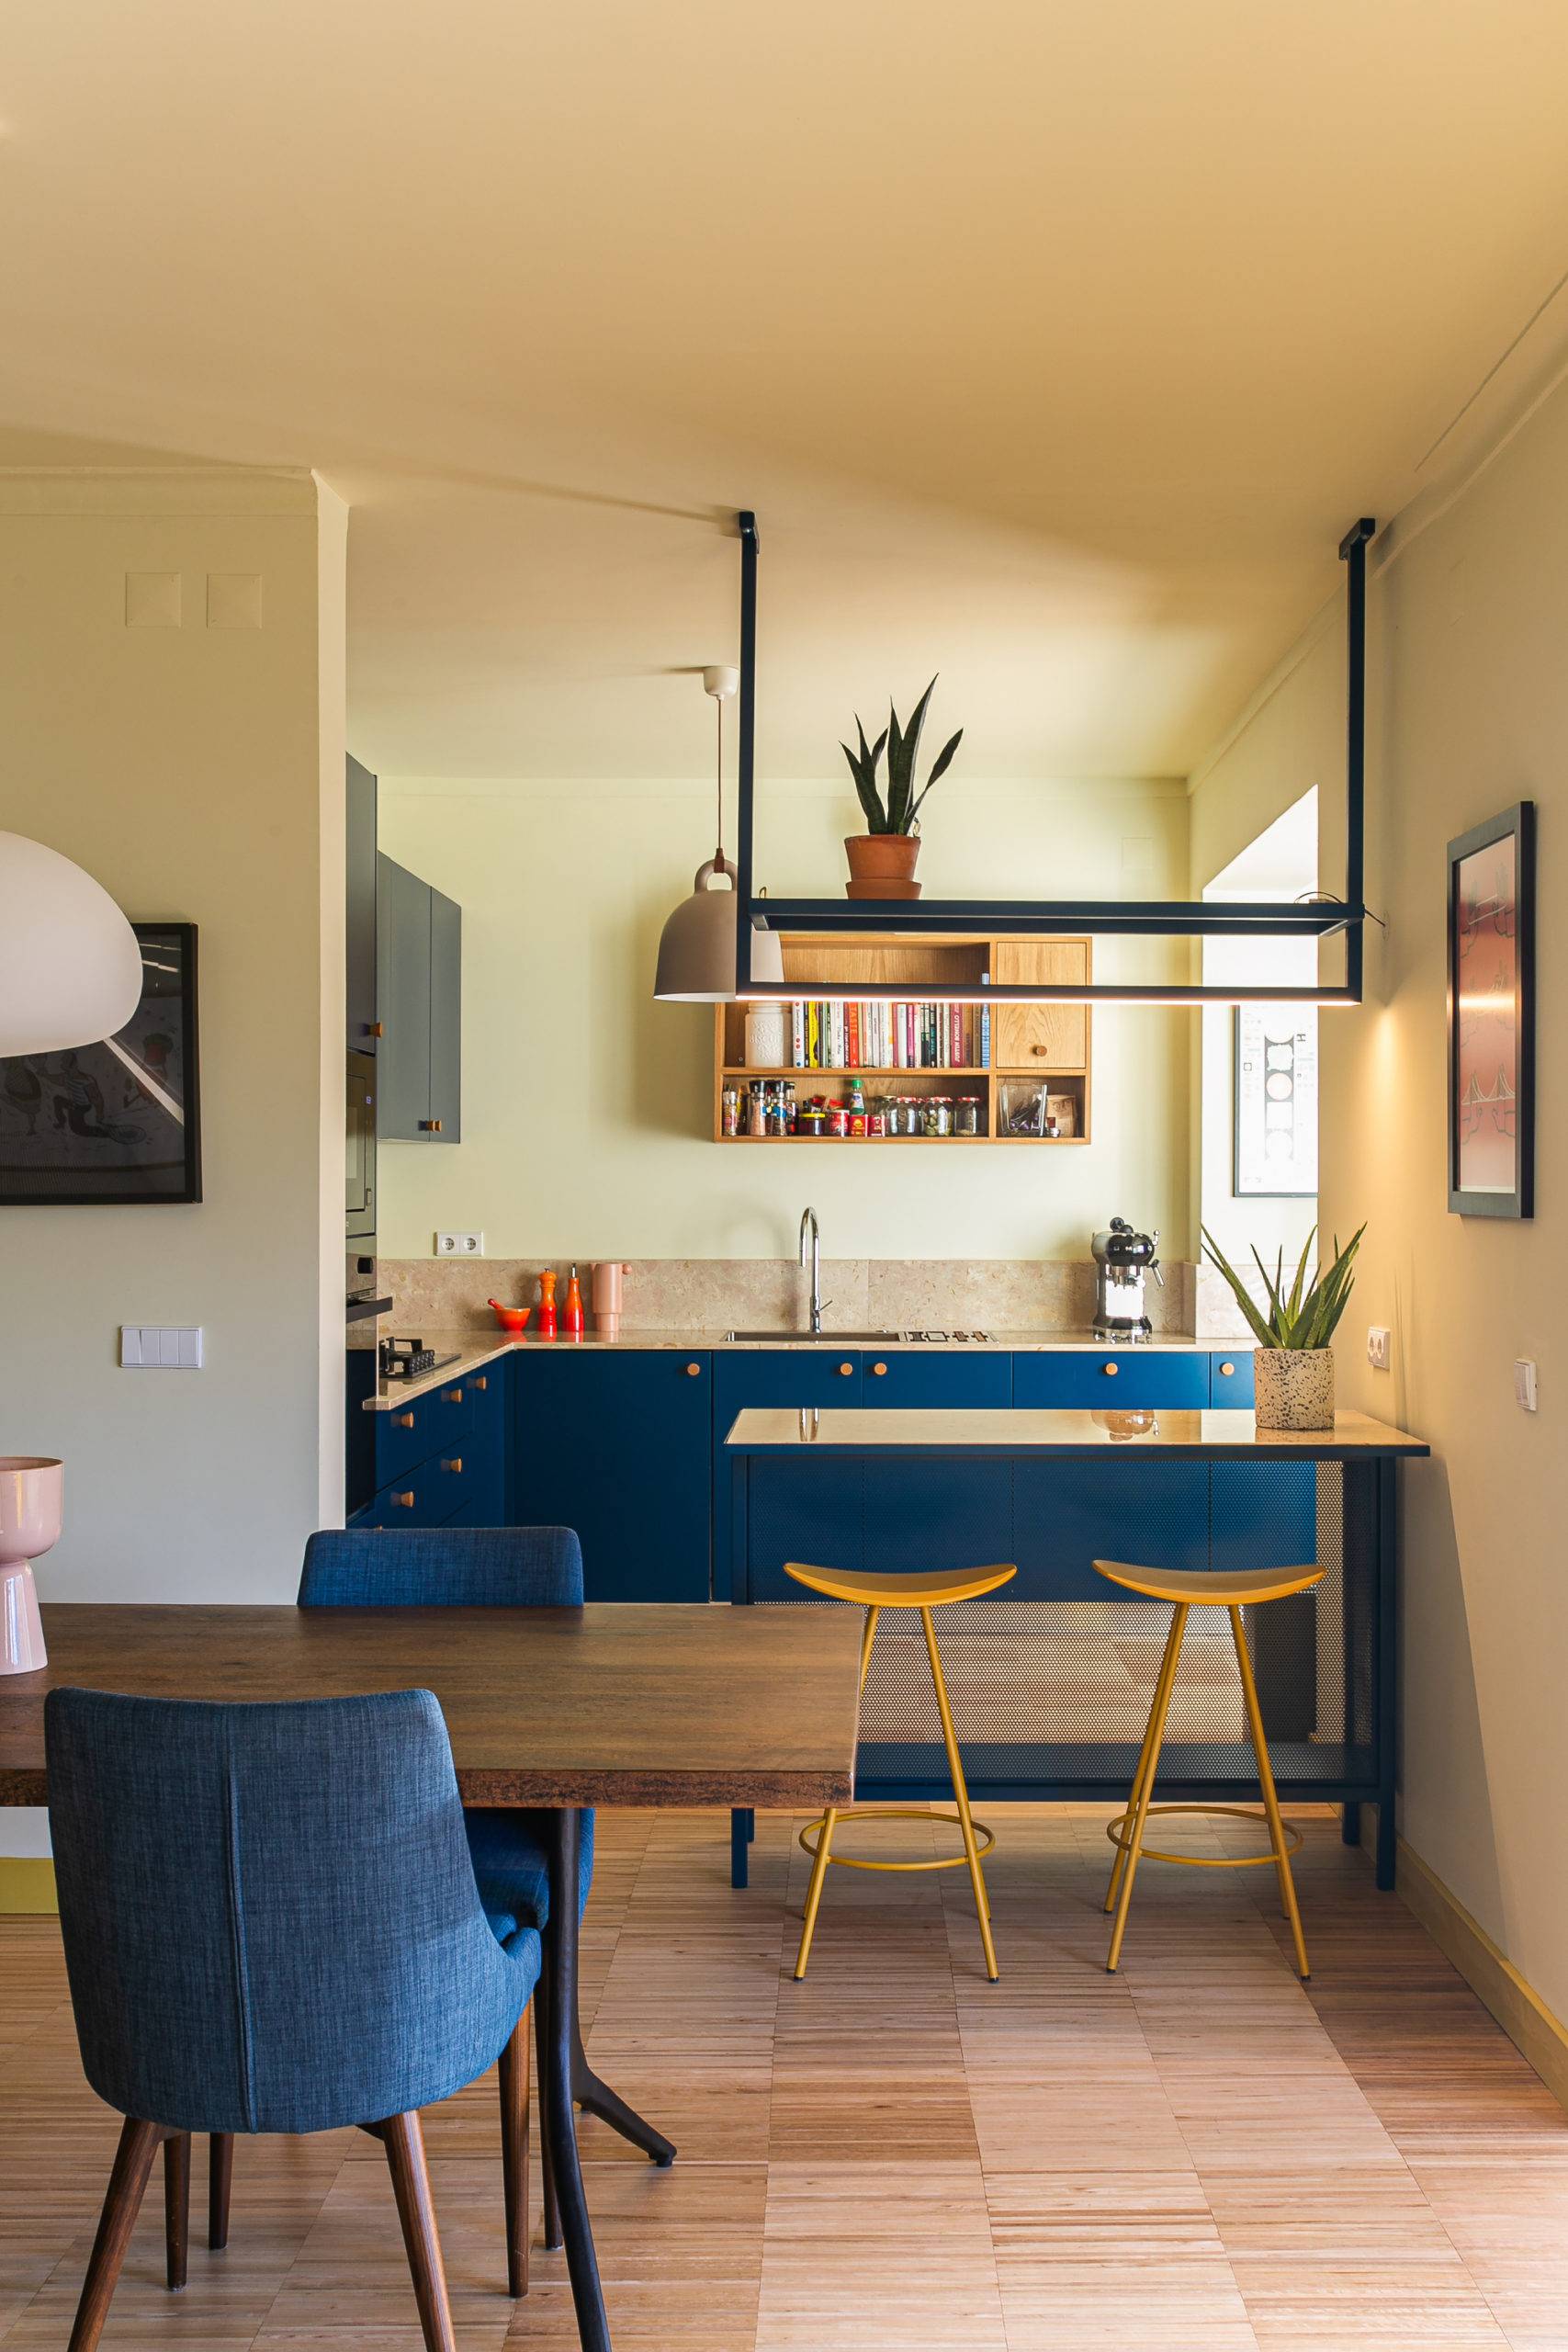 Kitchen-and-dining-area-of-the-apartment-with-ocean-blue-cabinets-and-yellow-bar-stools-35988-scaled